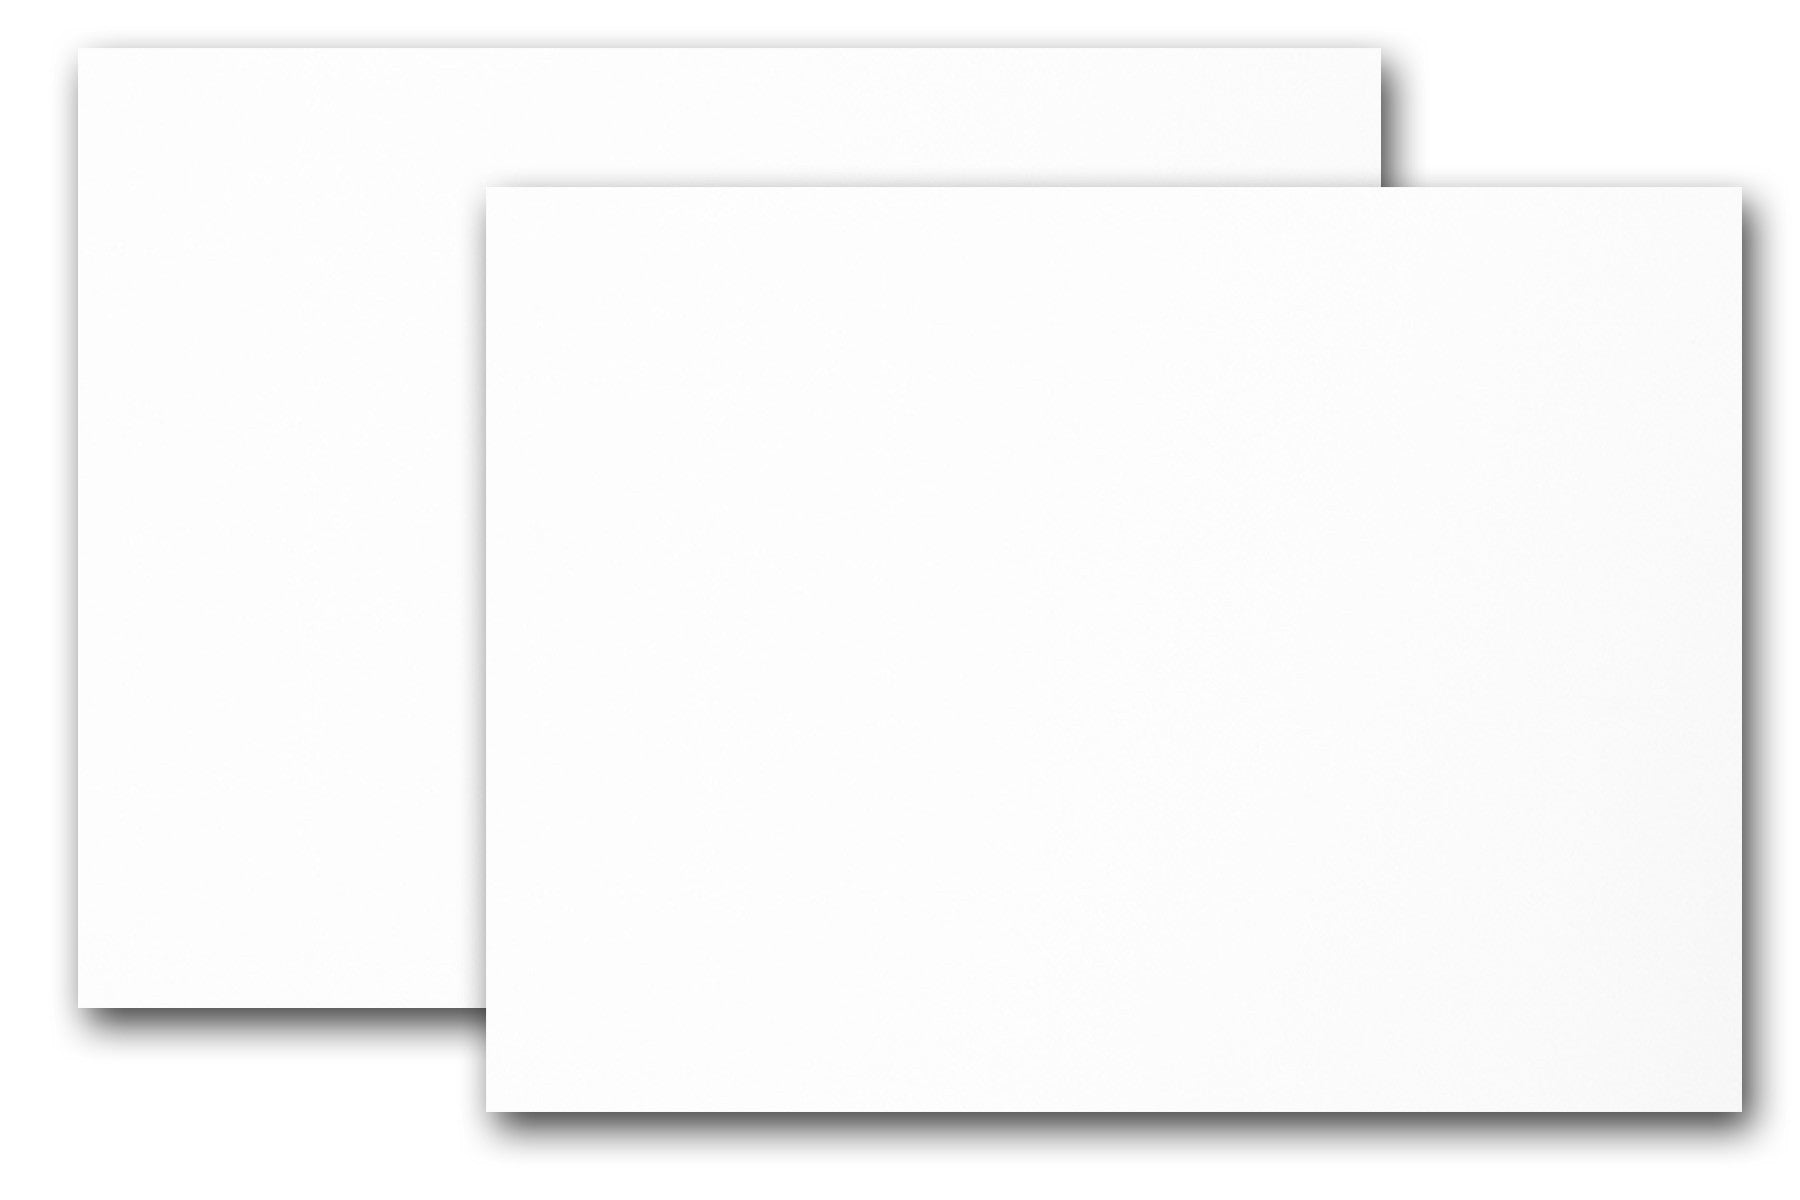 Discount White Card Stock for DIY Wedding invitations and cards